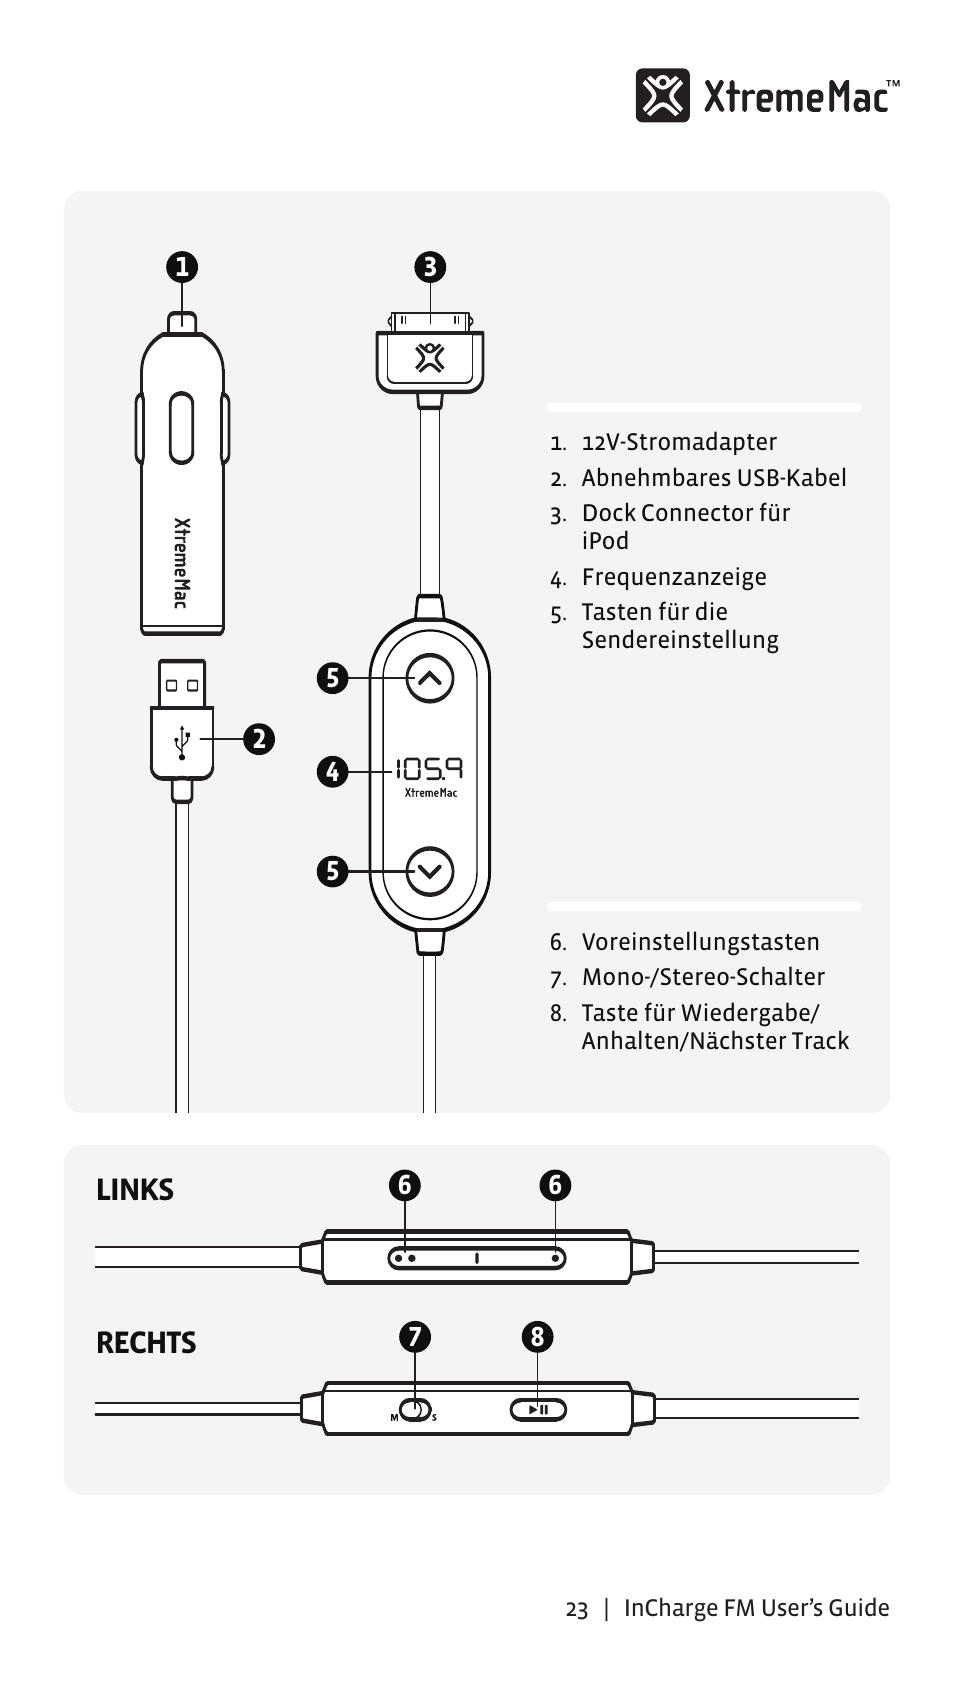 Links rechts | XtremeMac Incharge FM User Manual | Page 22 / 35